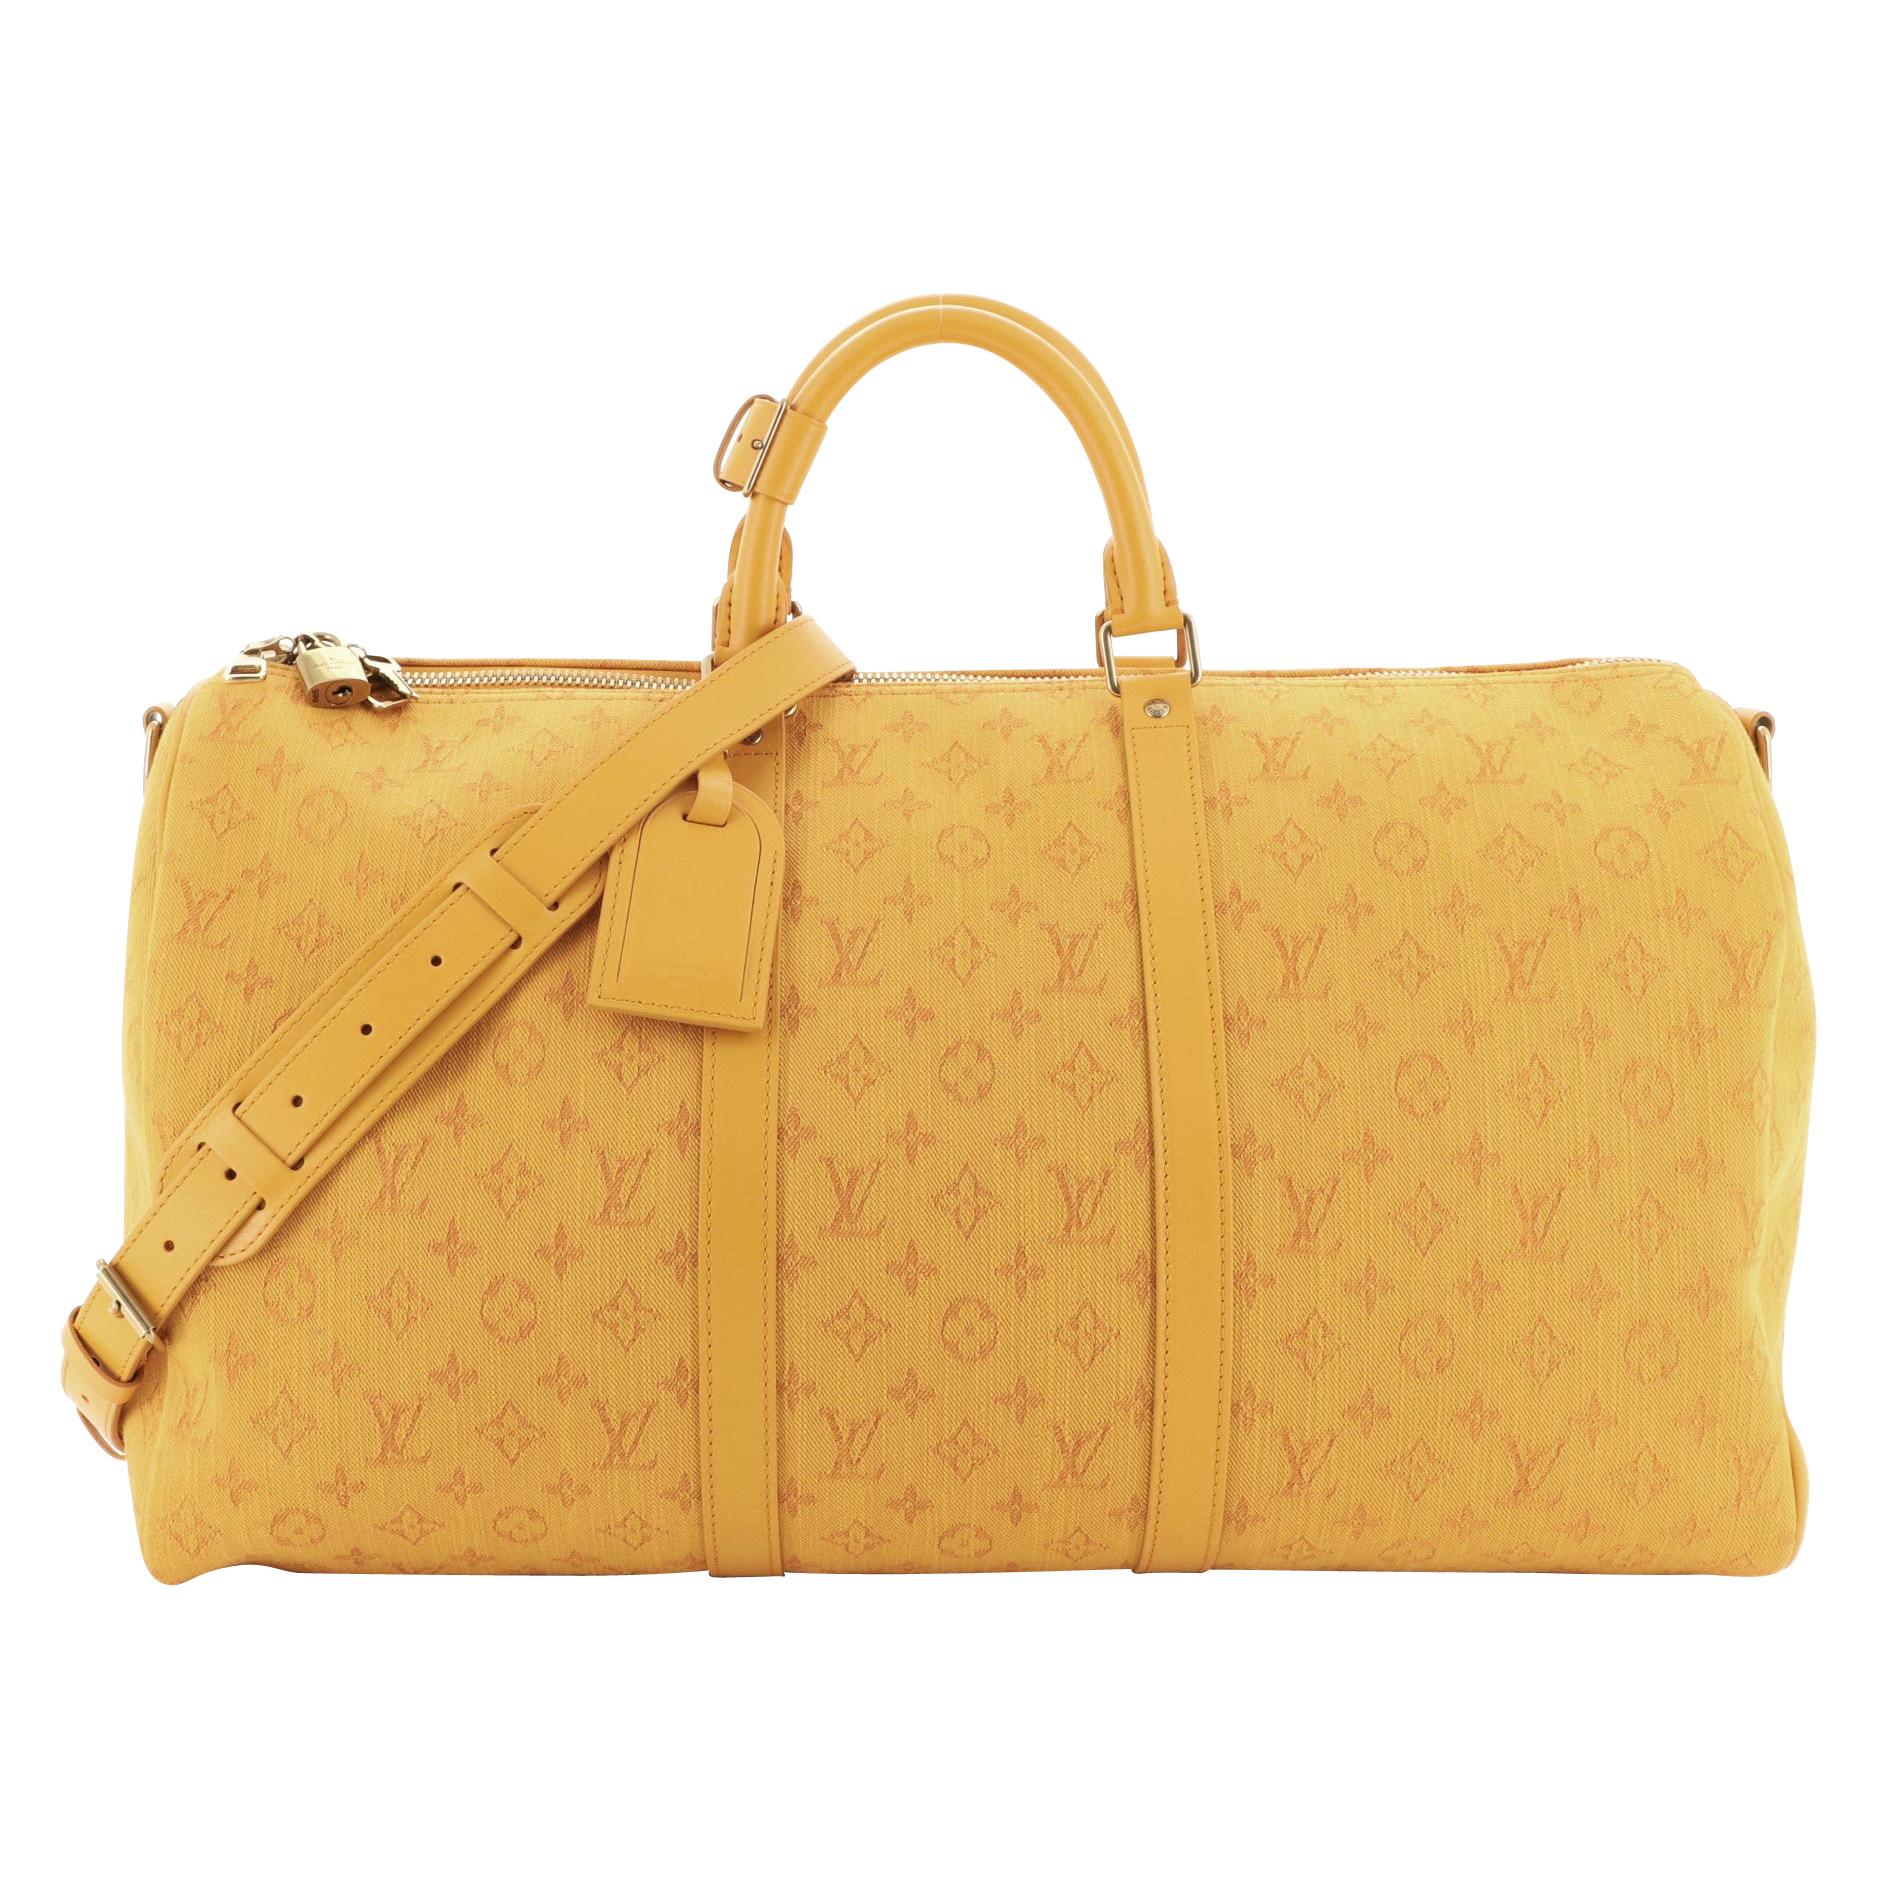 Only 878.00 usd for LOUIS VUITTON Keepall 50 Bandouliere Monogram Macassar  w/Yellow Neon Online at the Shop